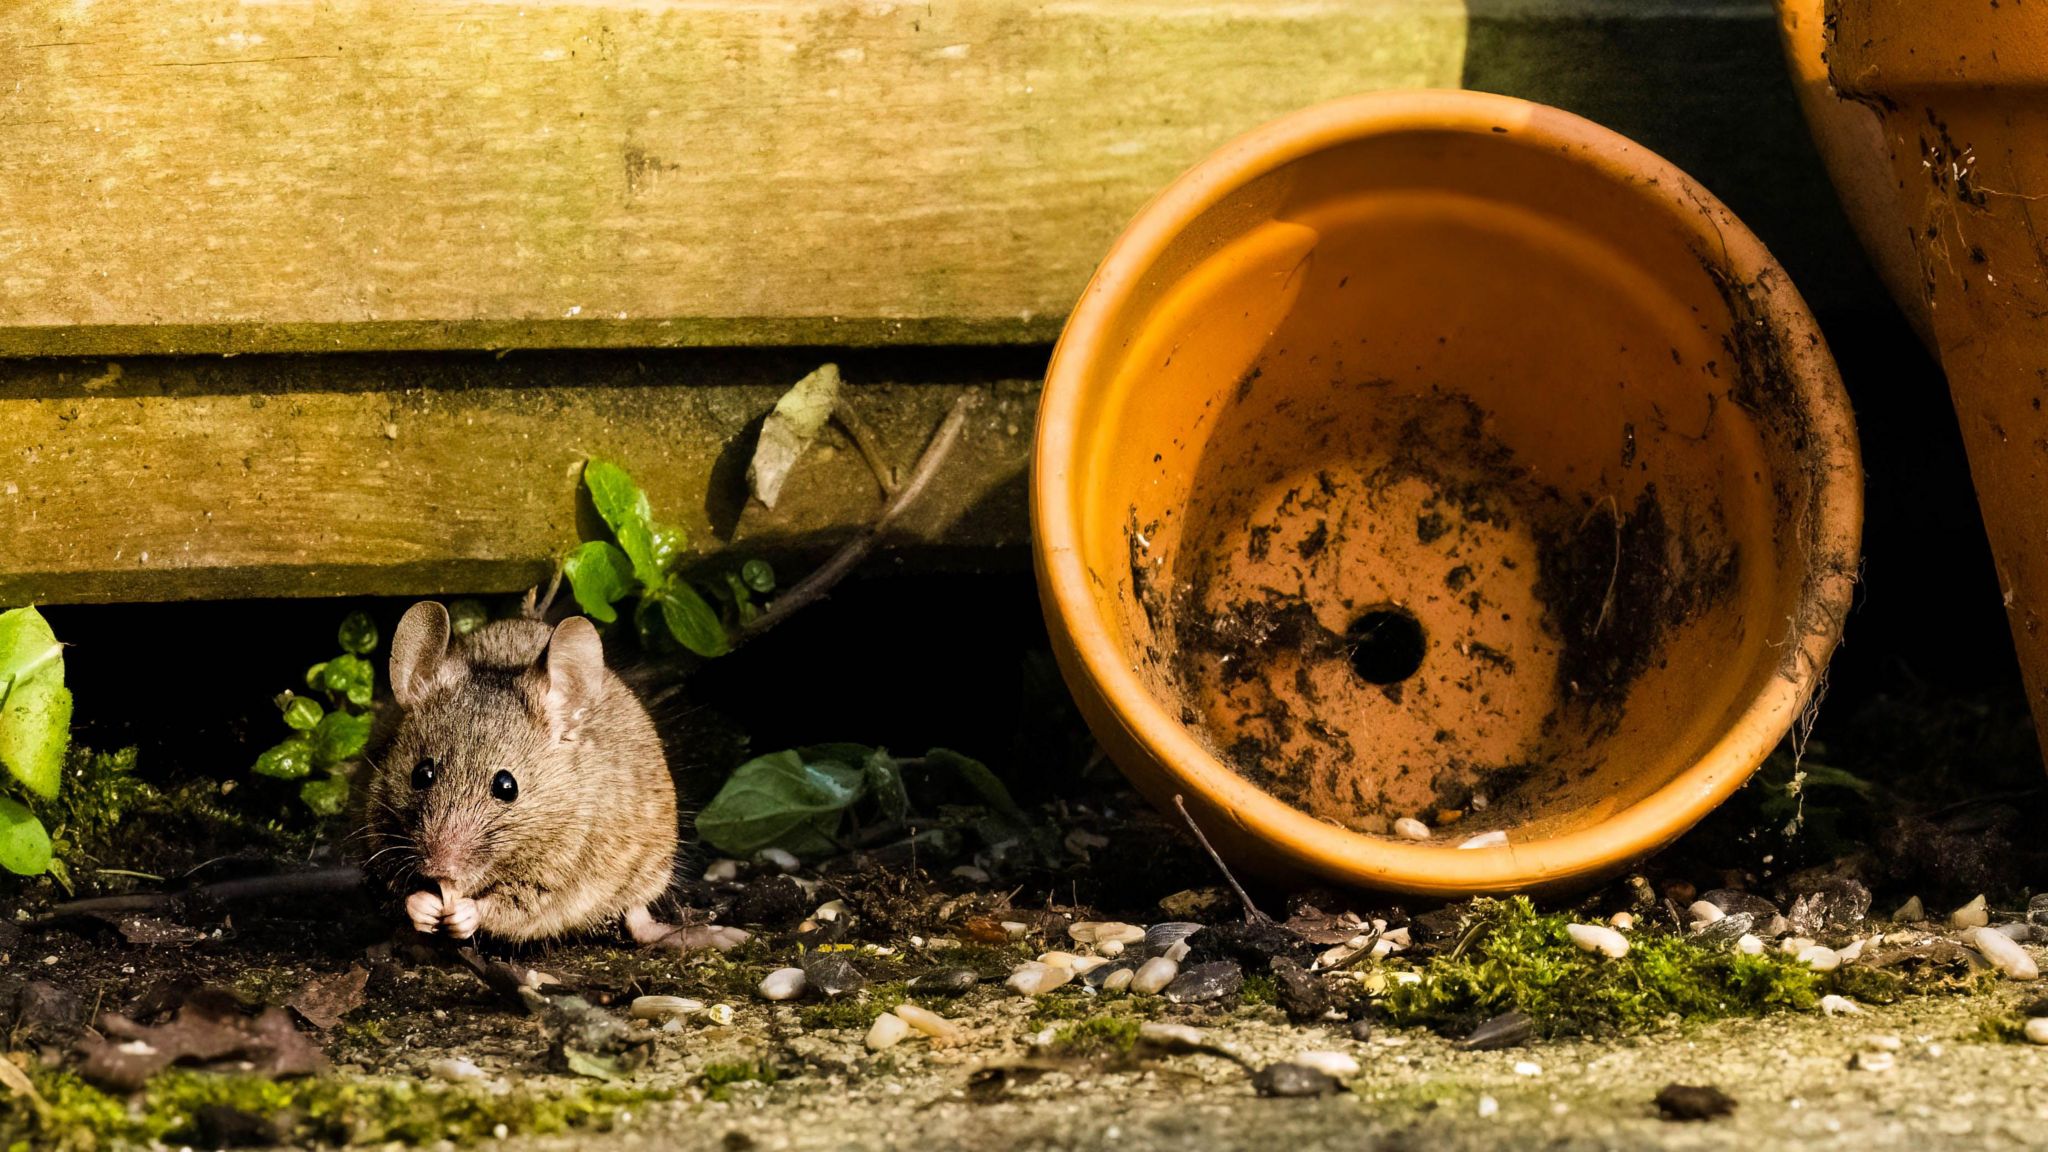 A photograph of a mouse next to an overturned garden pot